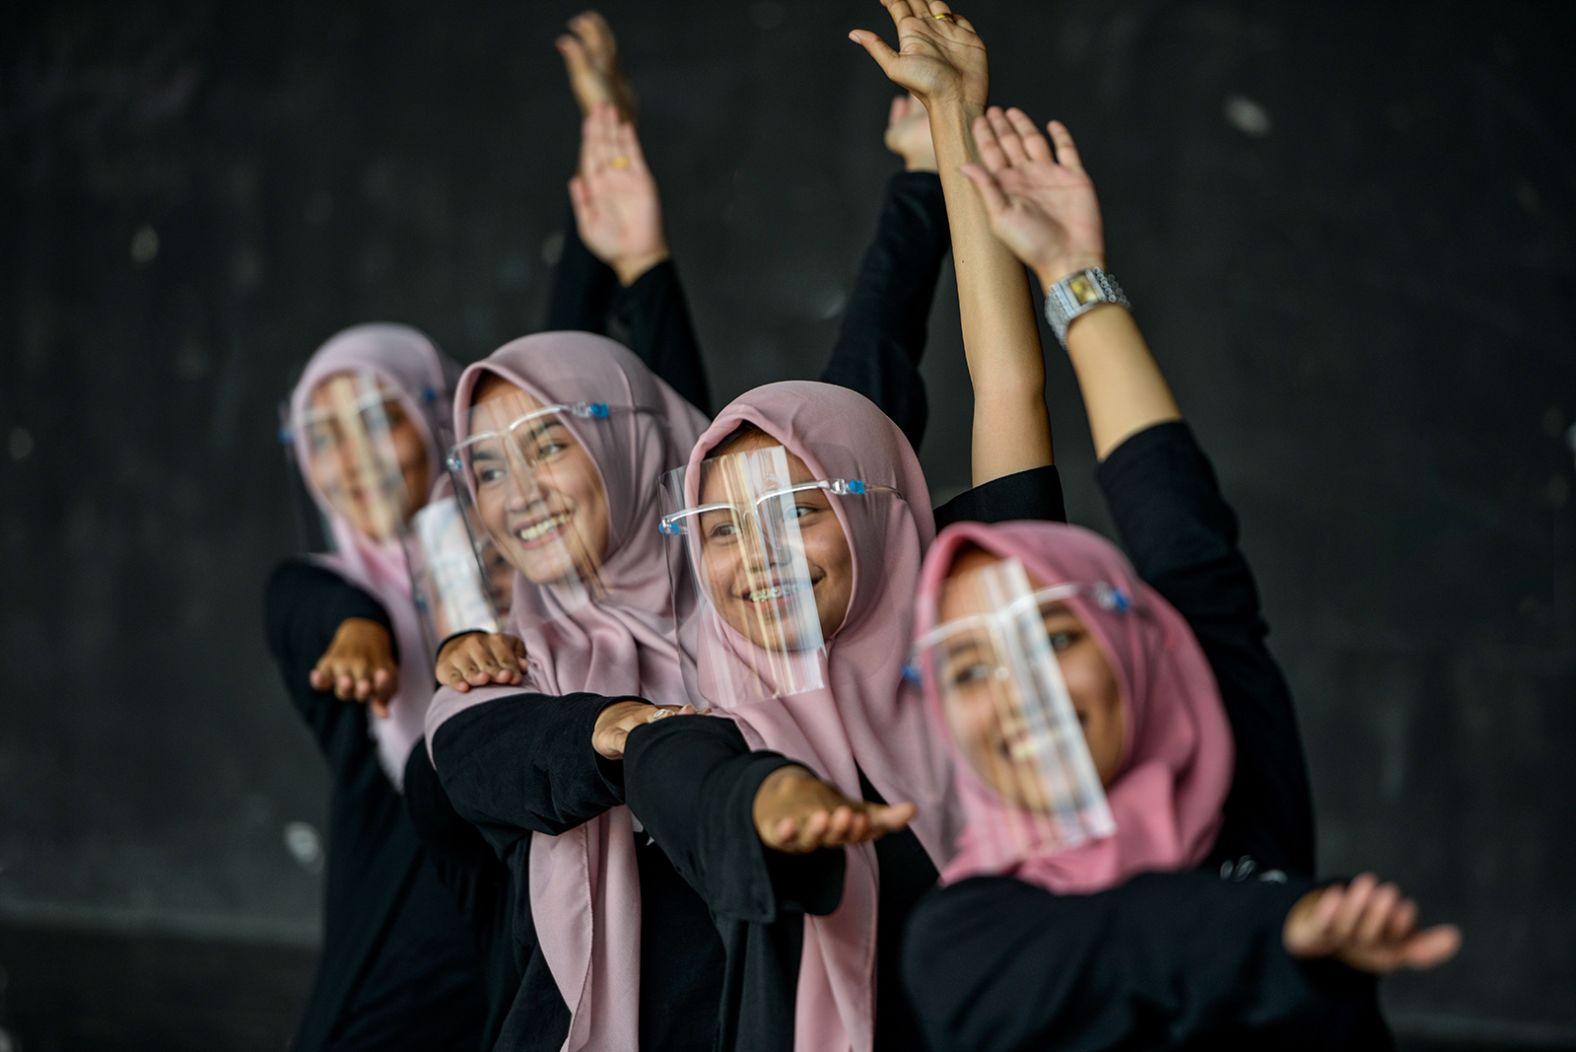 Dancers wearing face shields practice in Banda Aceh, Indonesia, on September 26.